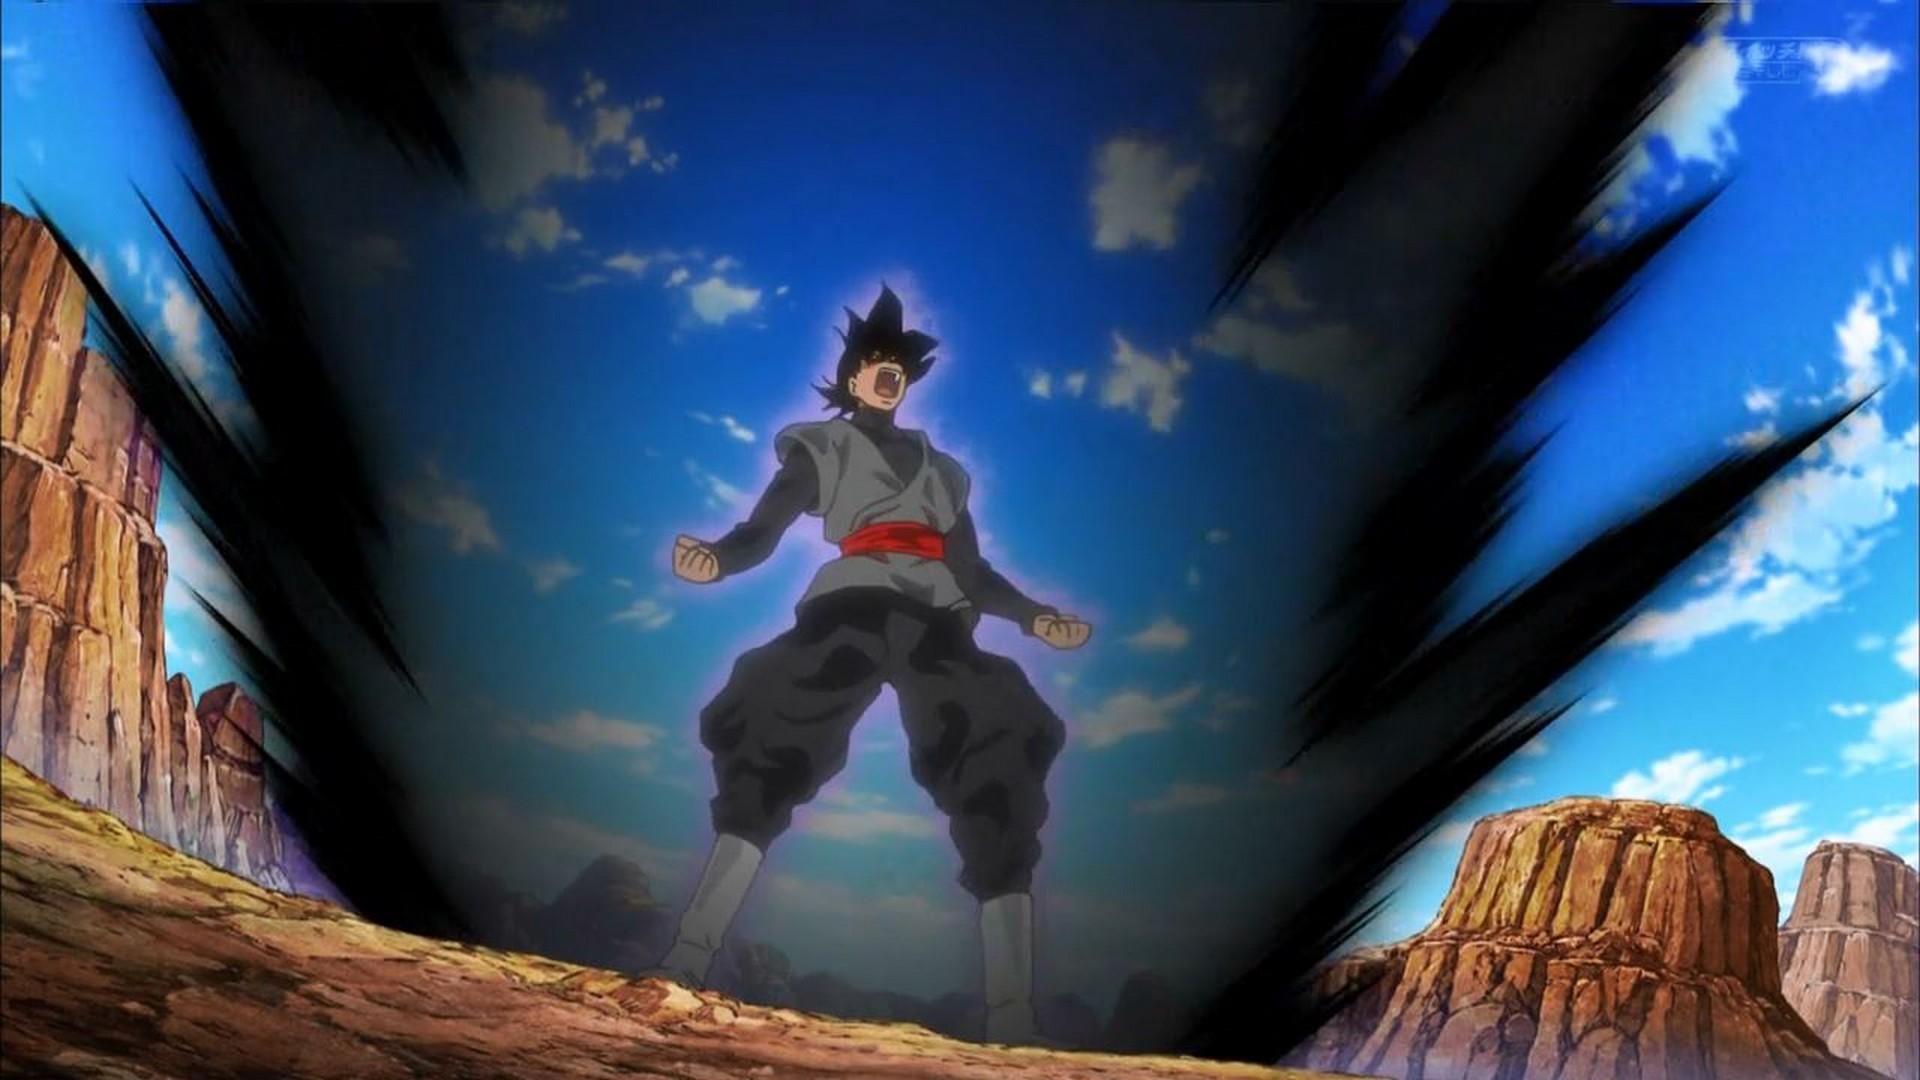 Black Goku Background Wallpaper HD with image resolution 1920x1080 pixel. You can make this wallpaper for your Desktop Computer Backgrounds, Mac Wallpapers, Android Lock screen or iPhone Screensavers